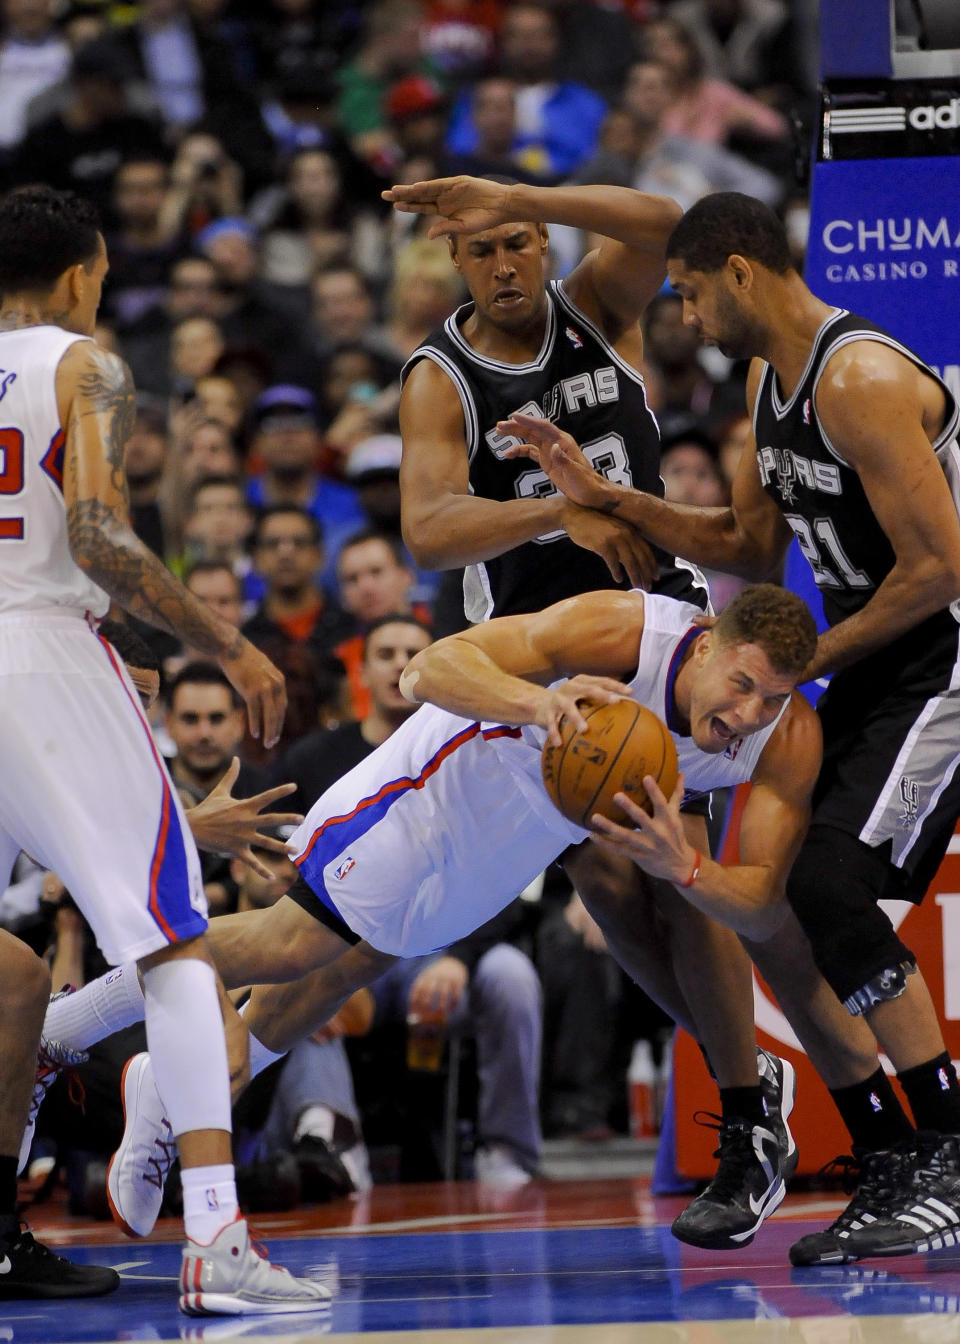 Los Angeles Clippers forward Blake Griffin, bottom middle, dives for the loose ball as San Antonio Spurs forward Boris Diaw (33), of France, and forward Tim Duncan (21) look on in the first half of a NBA basketball game, Tuesday, Feb. 18, 2014, in Los Angeles.(AP Photo/Gus Ruelas)